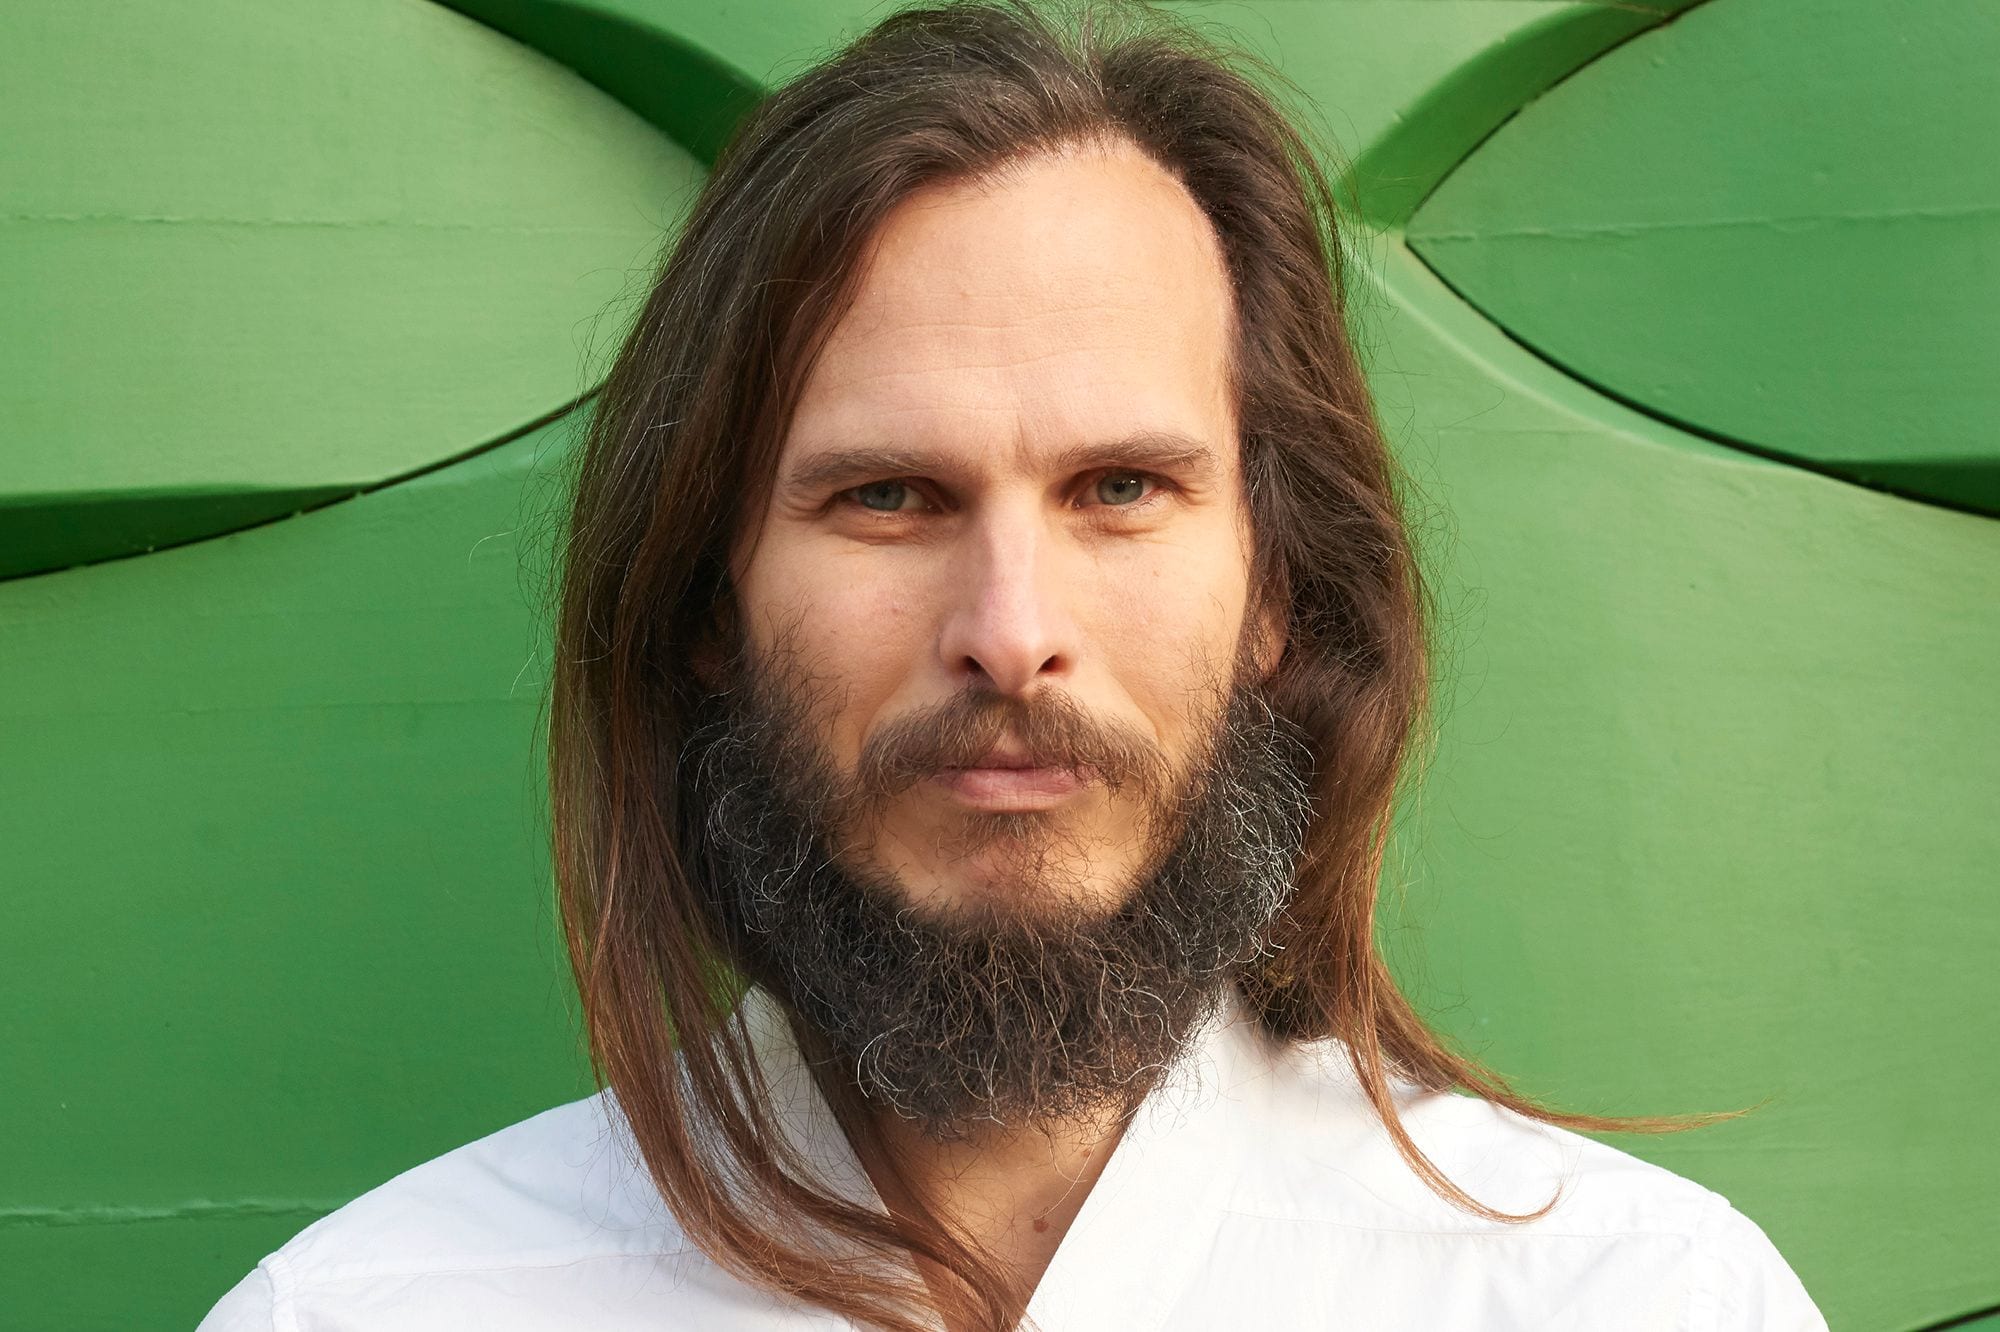 Pantha Du Prince Creates an Electronic ‘Conference of Trees’